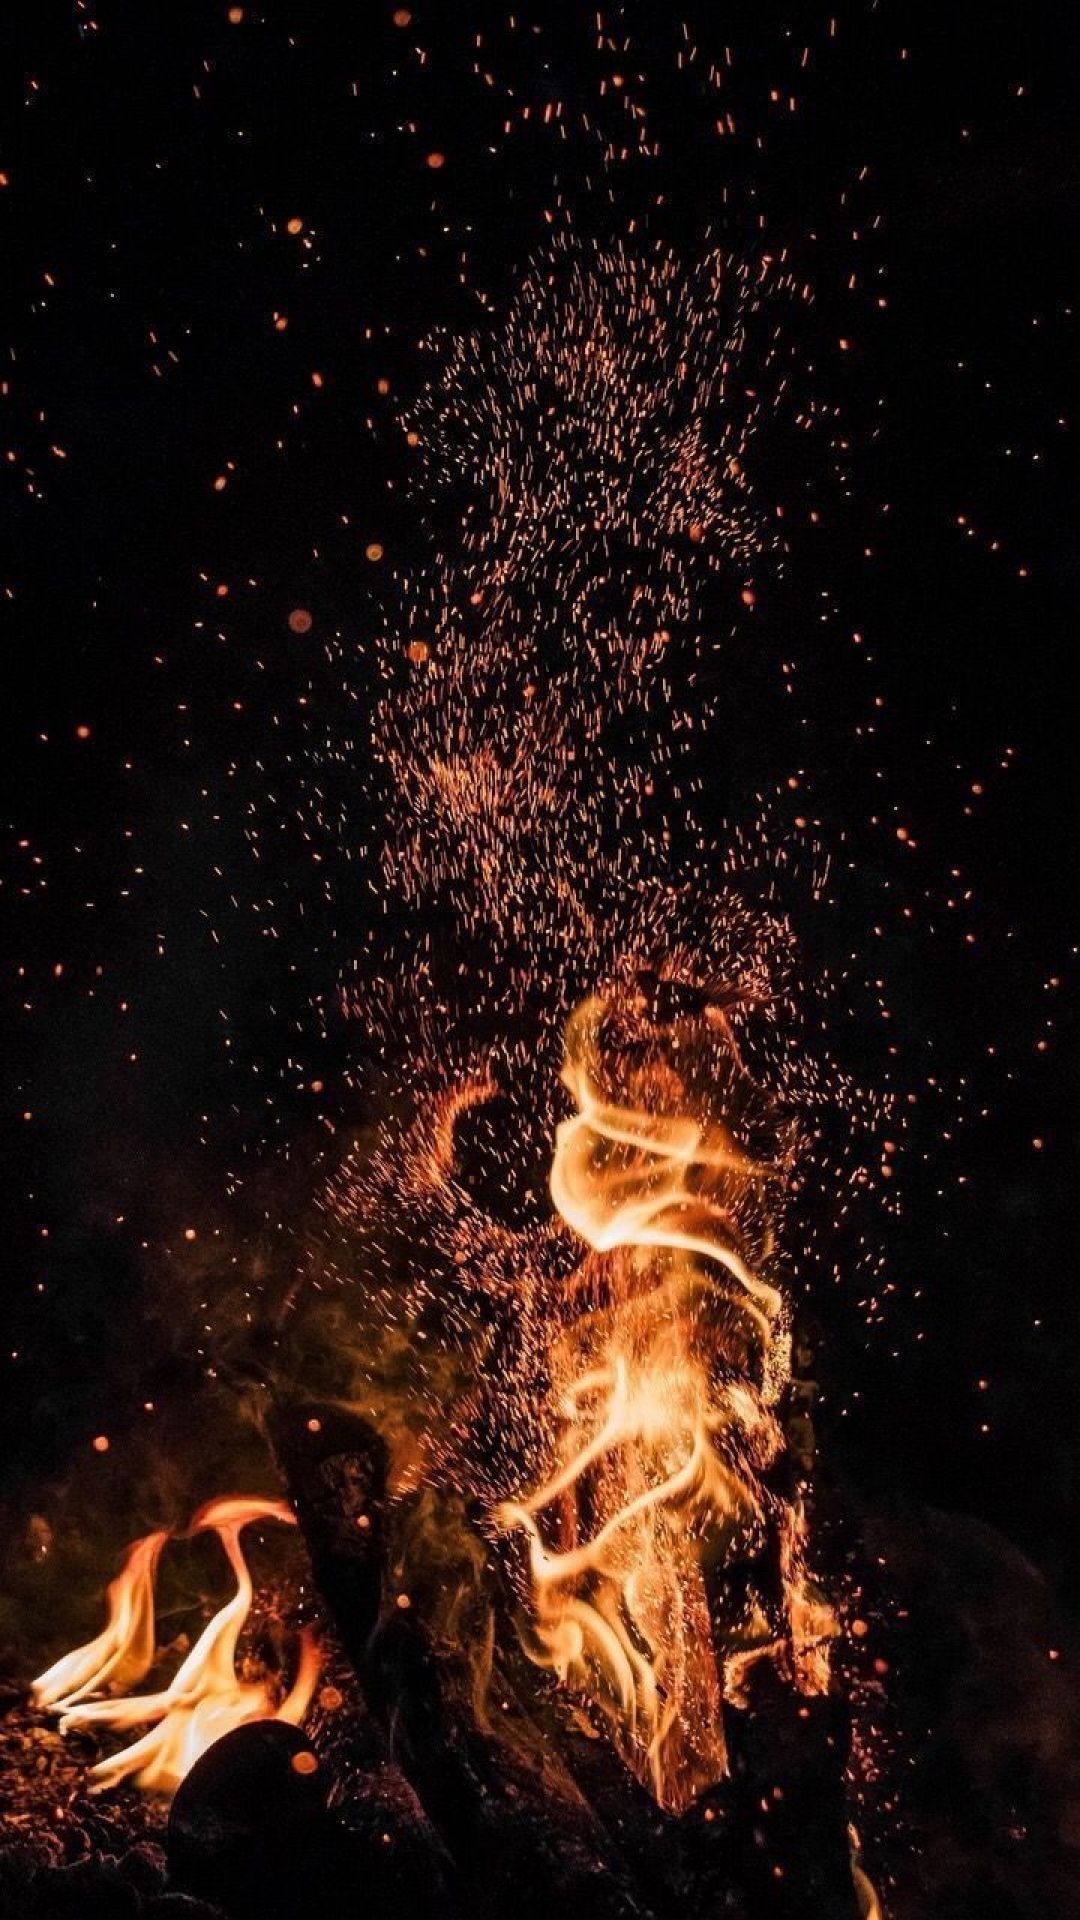 Aesthetic Fire HD Wallpaper (Desktop Background / Android / iPhone) (1080p, 4k) (1080x1920) (2020)